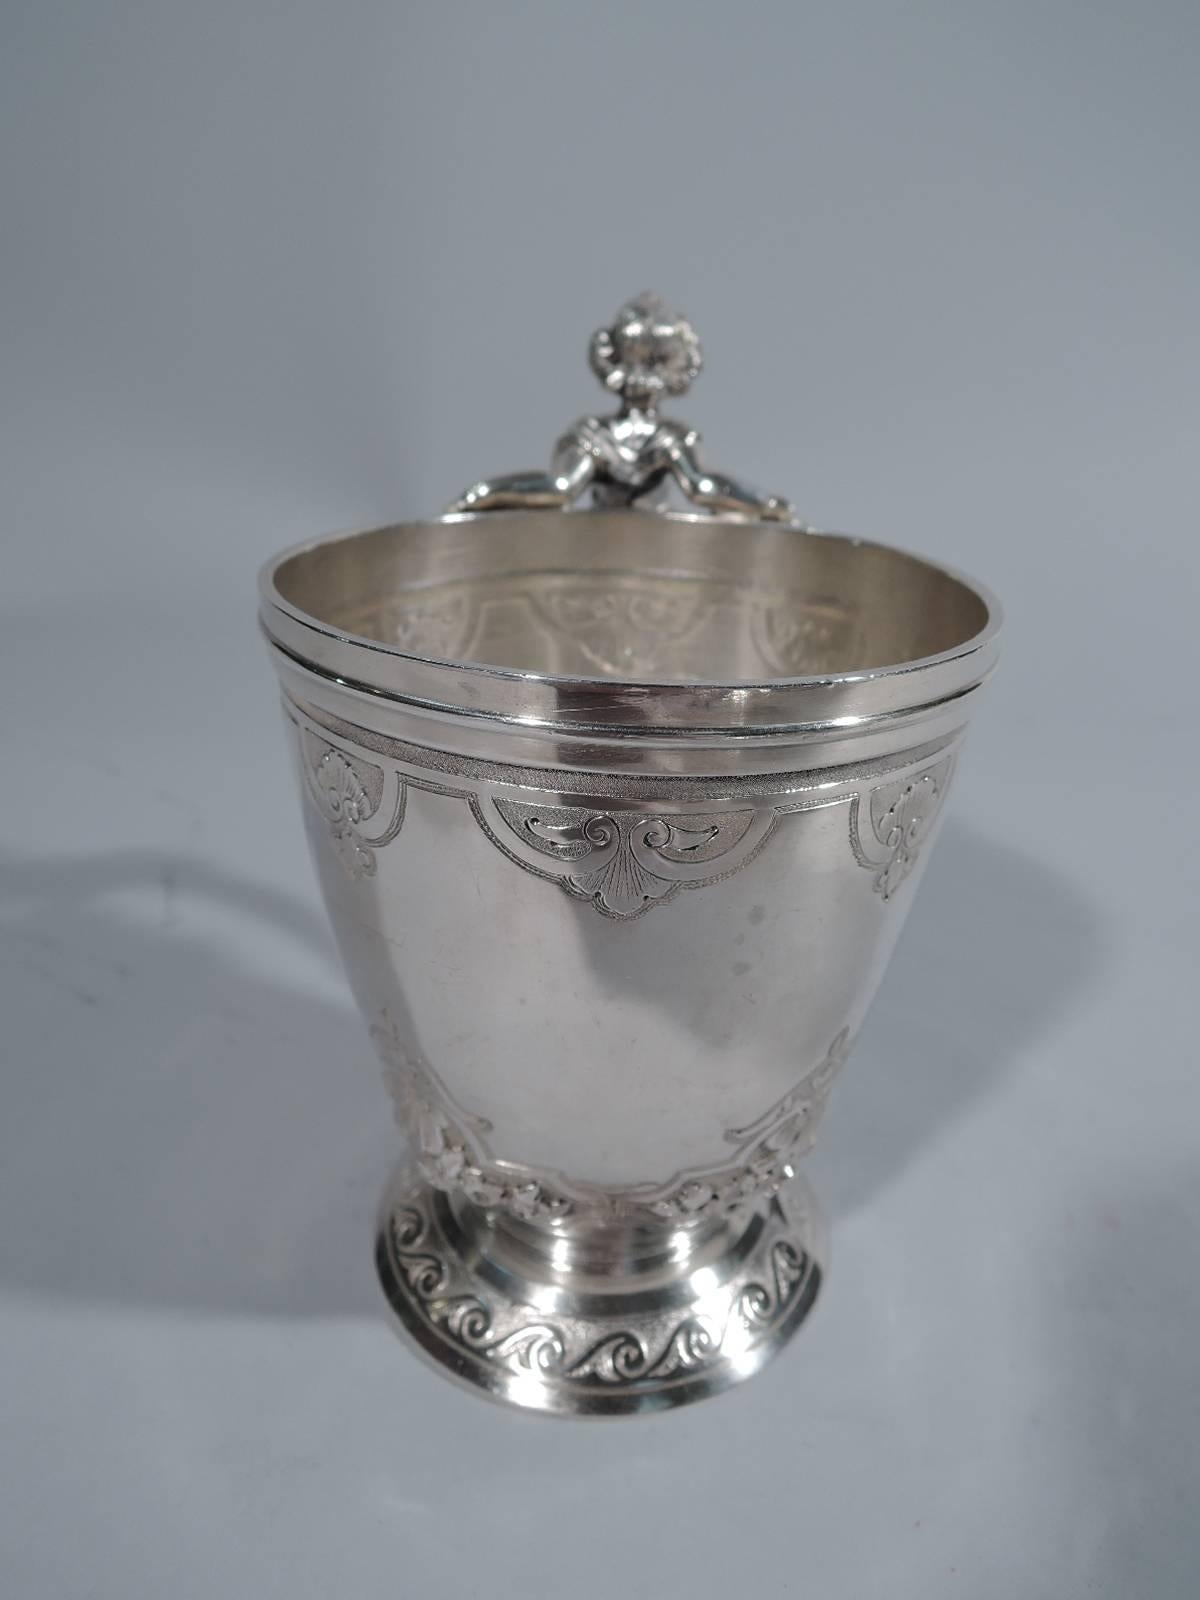 Coin silver baby cup. Made by Gorham in Providence, circa 1860. Curved and tapering sides on raised foot. Strapwork inset with flowers and rinceaux. Cast caryatid handle in form of classical female with grape bunch mounts. Hallmark includes no. 503.